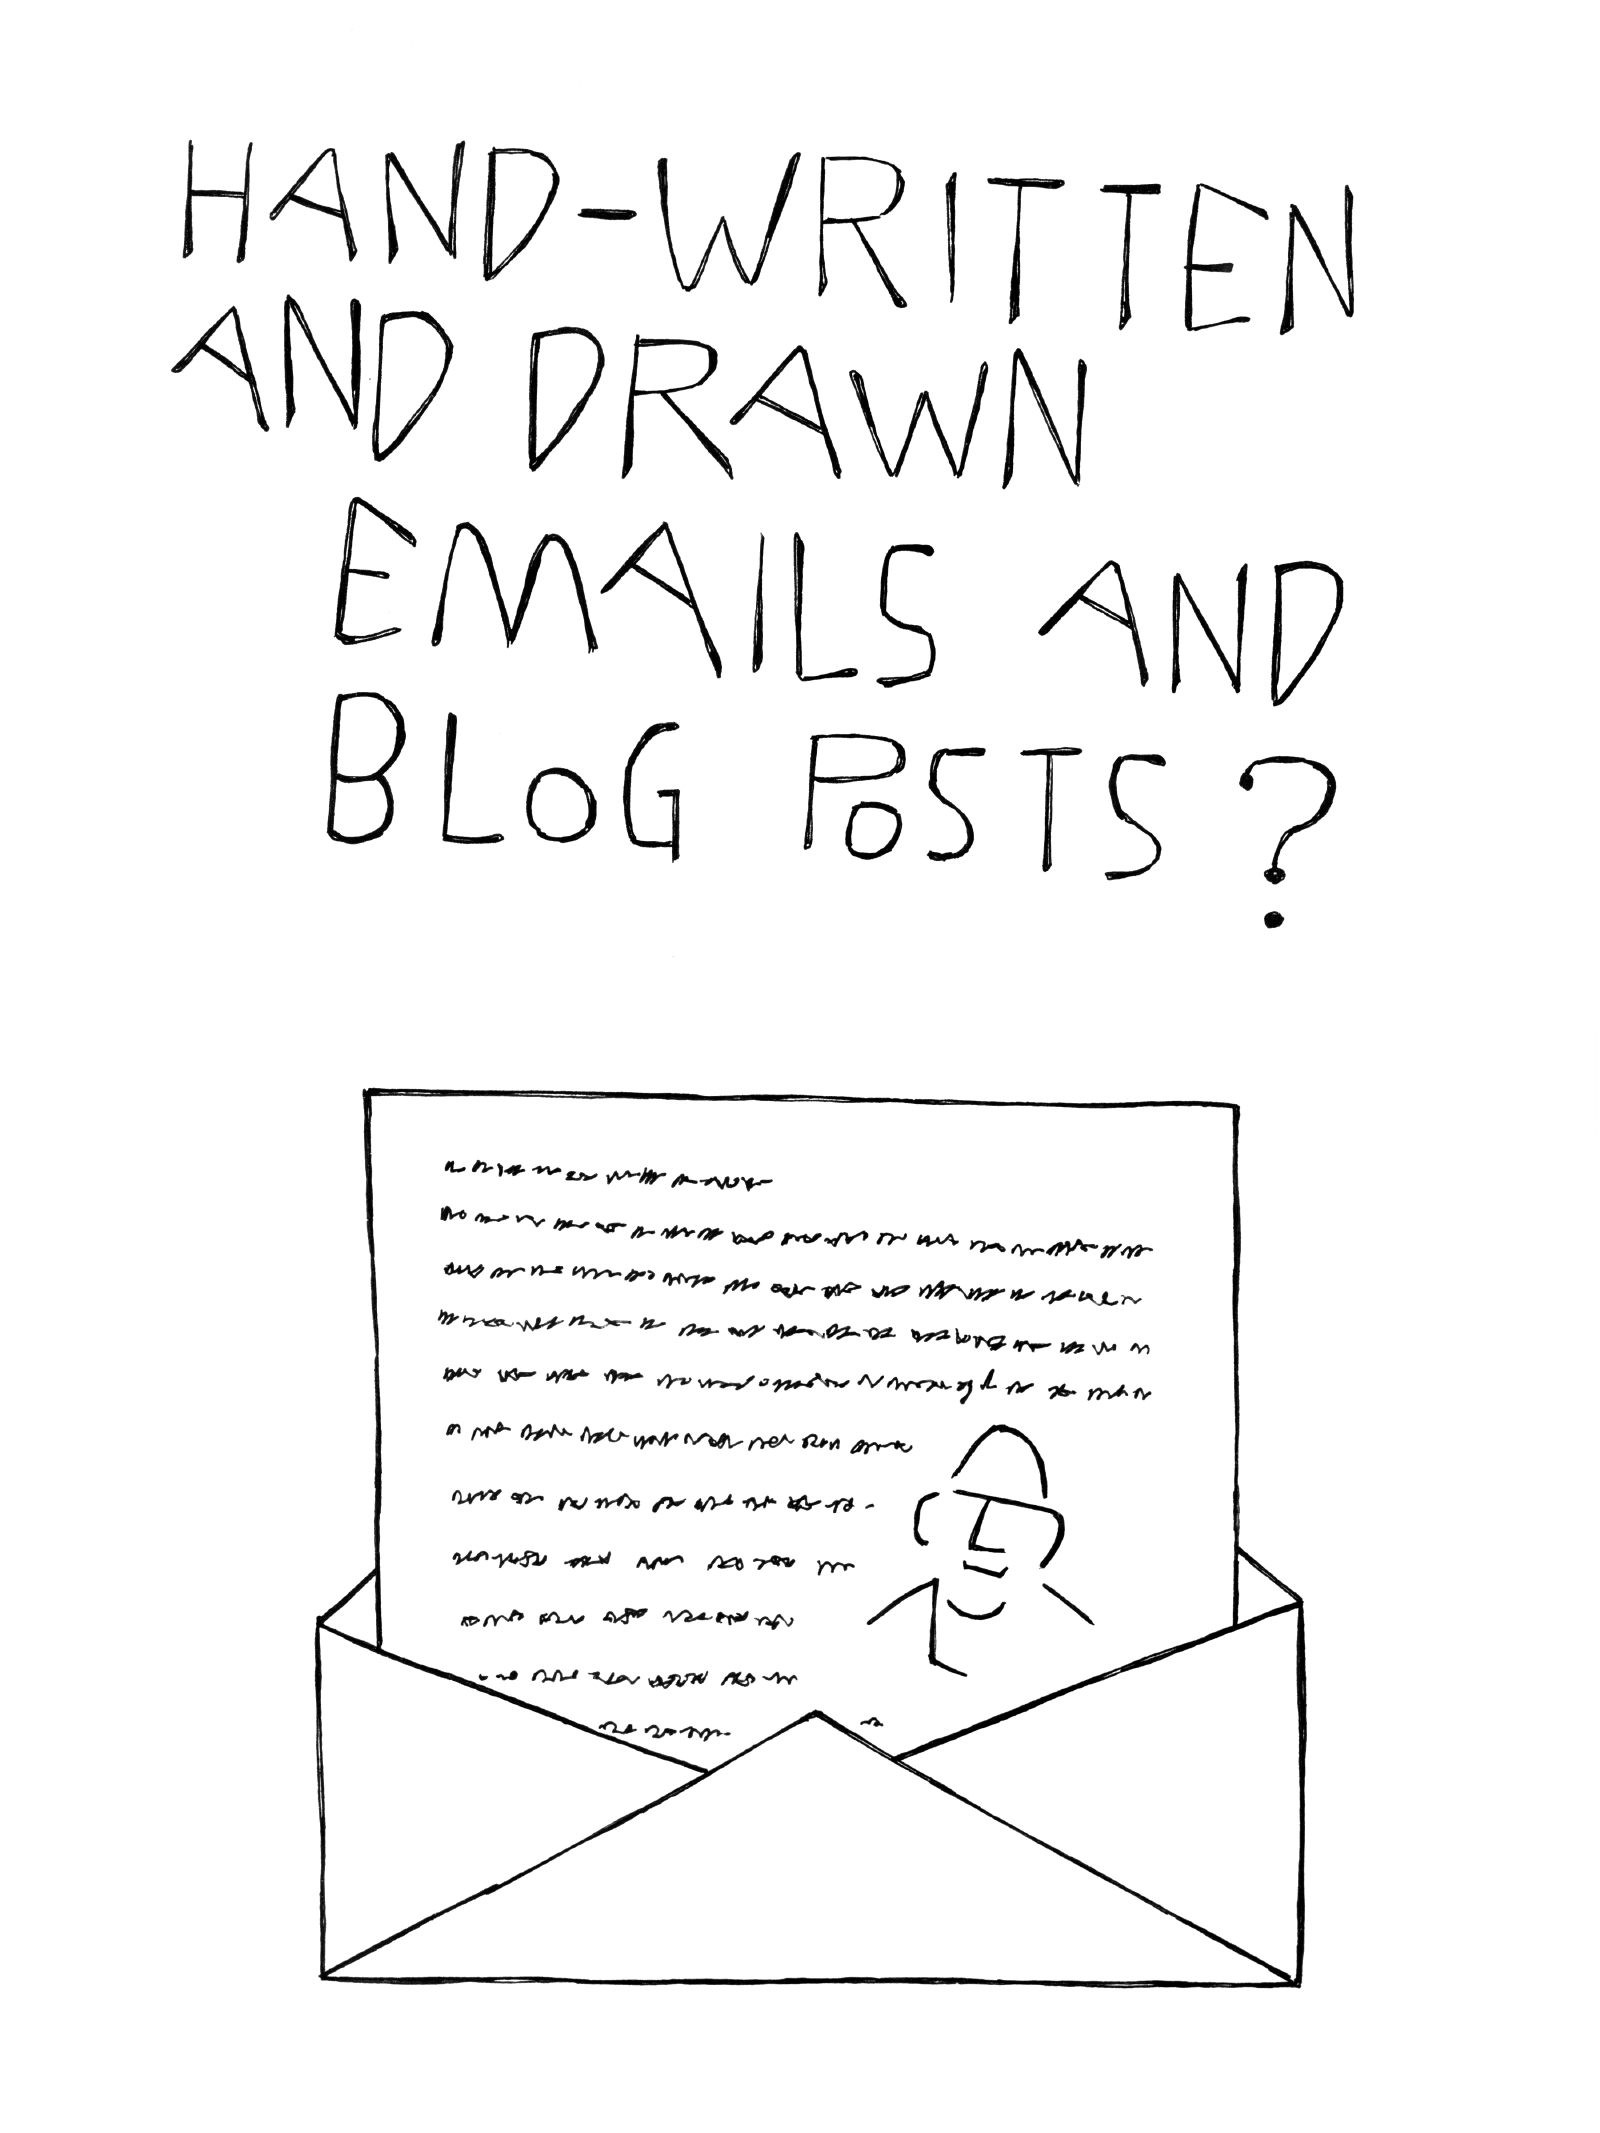 hand-written and drawn blog posts?